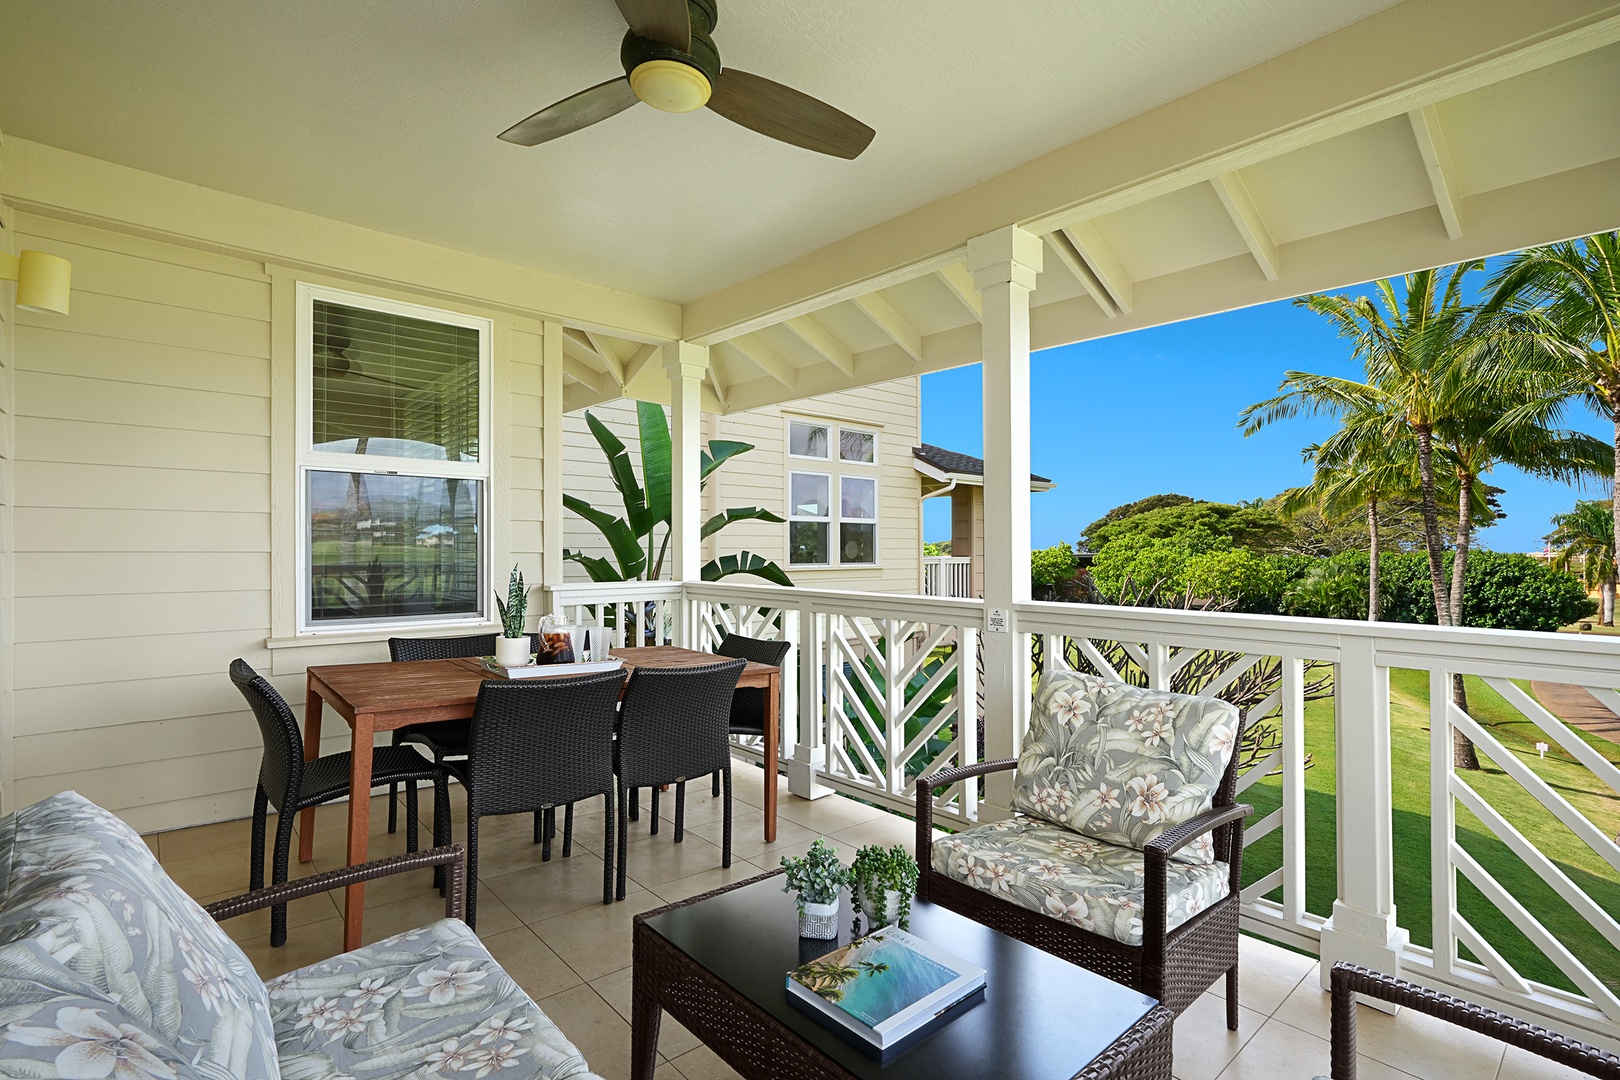 Koloa Vacation Rentals, Pili Mai 11K - Enjoy your morning coffee on the lanai with a view.